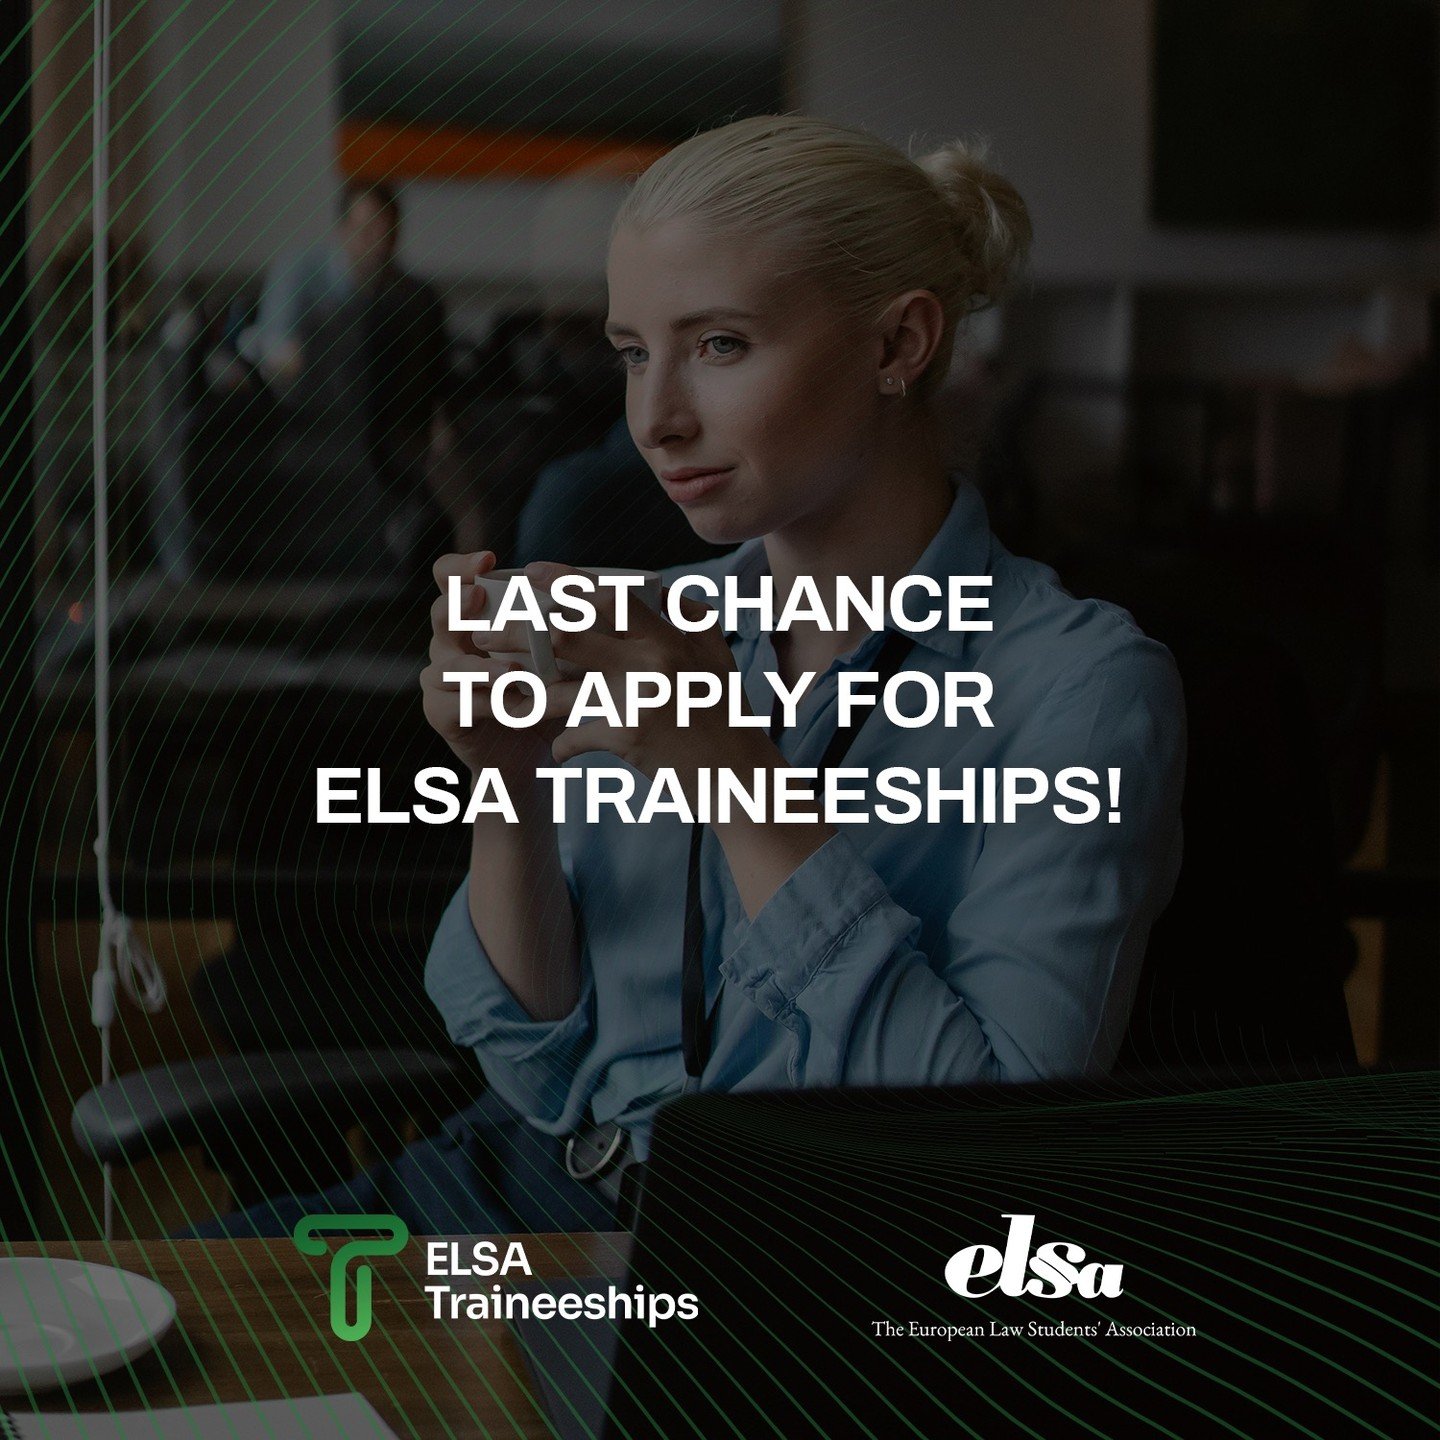 Final boarding call for your career journey! 🚀 Start strong with an ELSA Traineeship. Explore opportunities, gain invaluable experience, and elevate your professional skills. Act now&mdash;applications close today! Visit Traineeships.elsa.org to sec